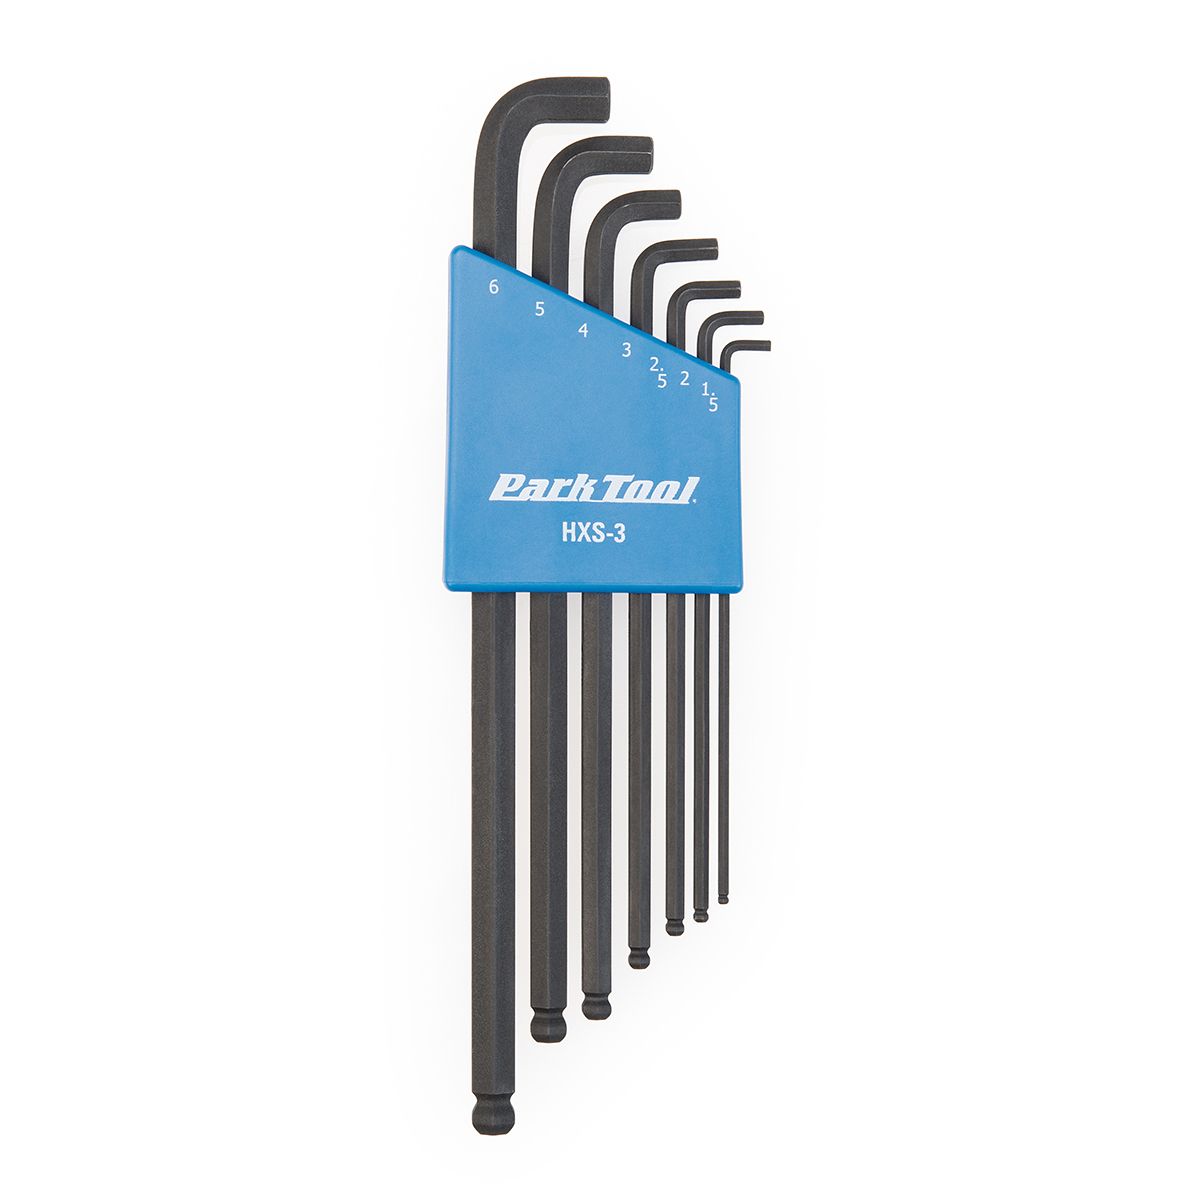 *PARK TOOL* stubby hex wrench set